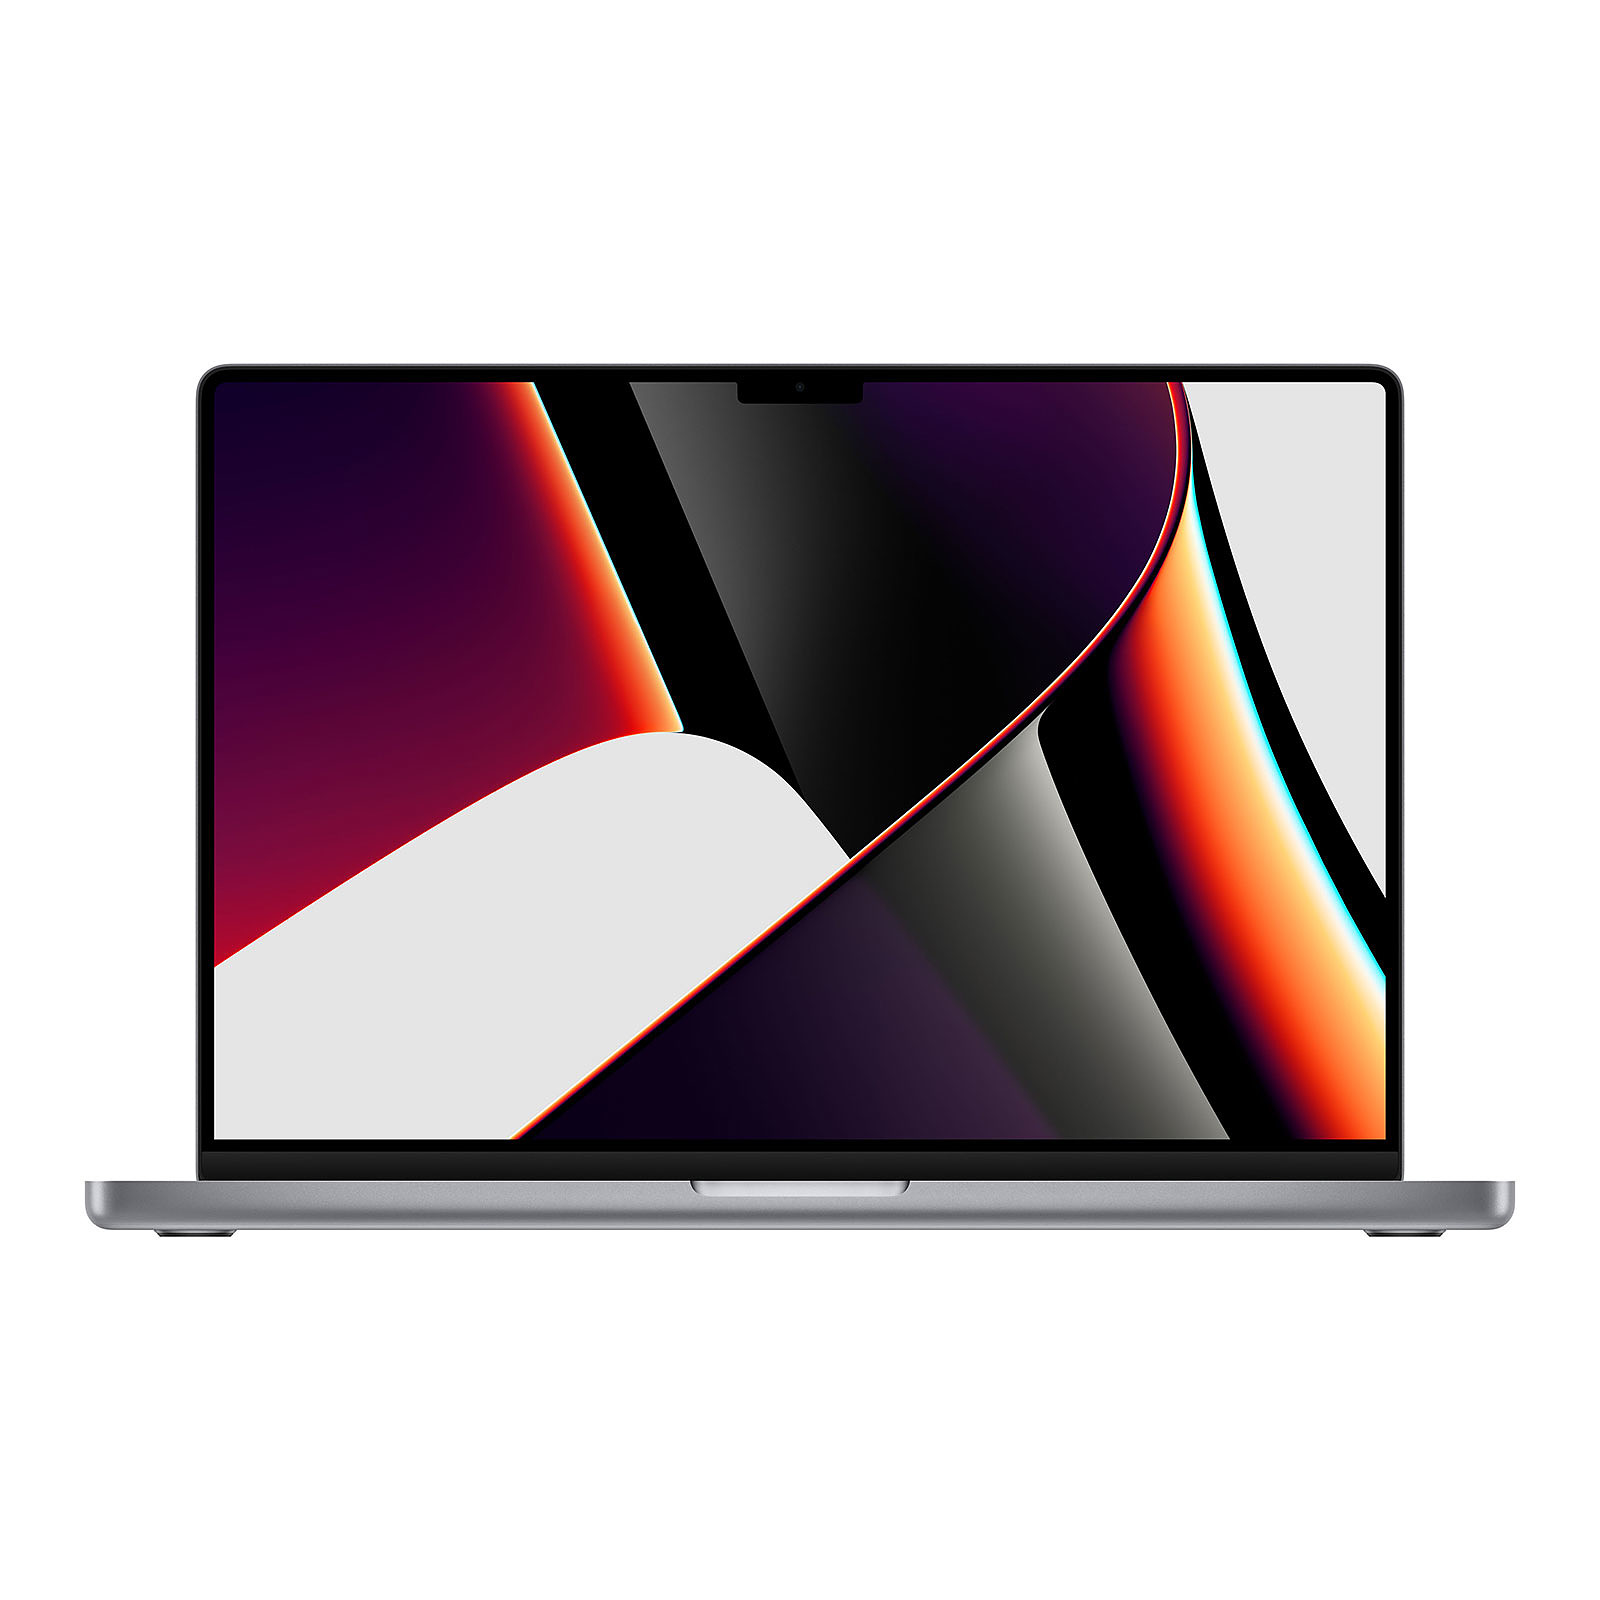 Apple MacBook Pro M1 Max (2021) 16" Gris sideral 32Go/1To (MK1A3FN/A) - MacBook Apple